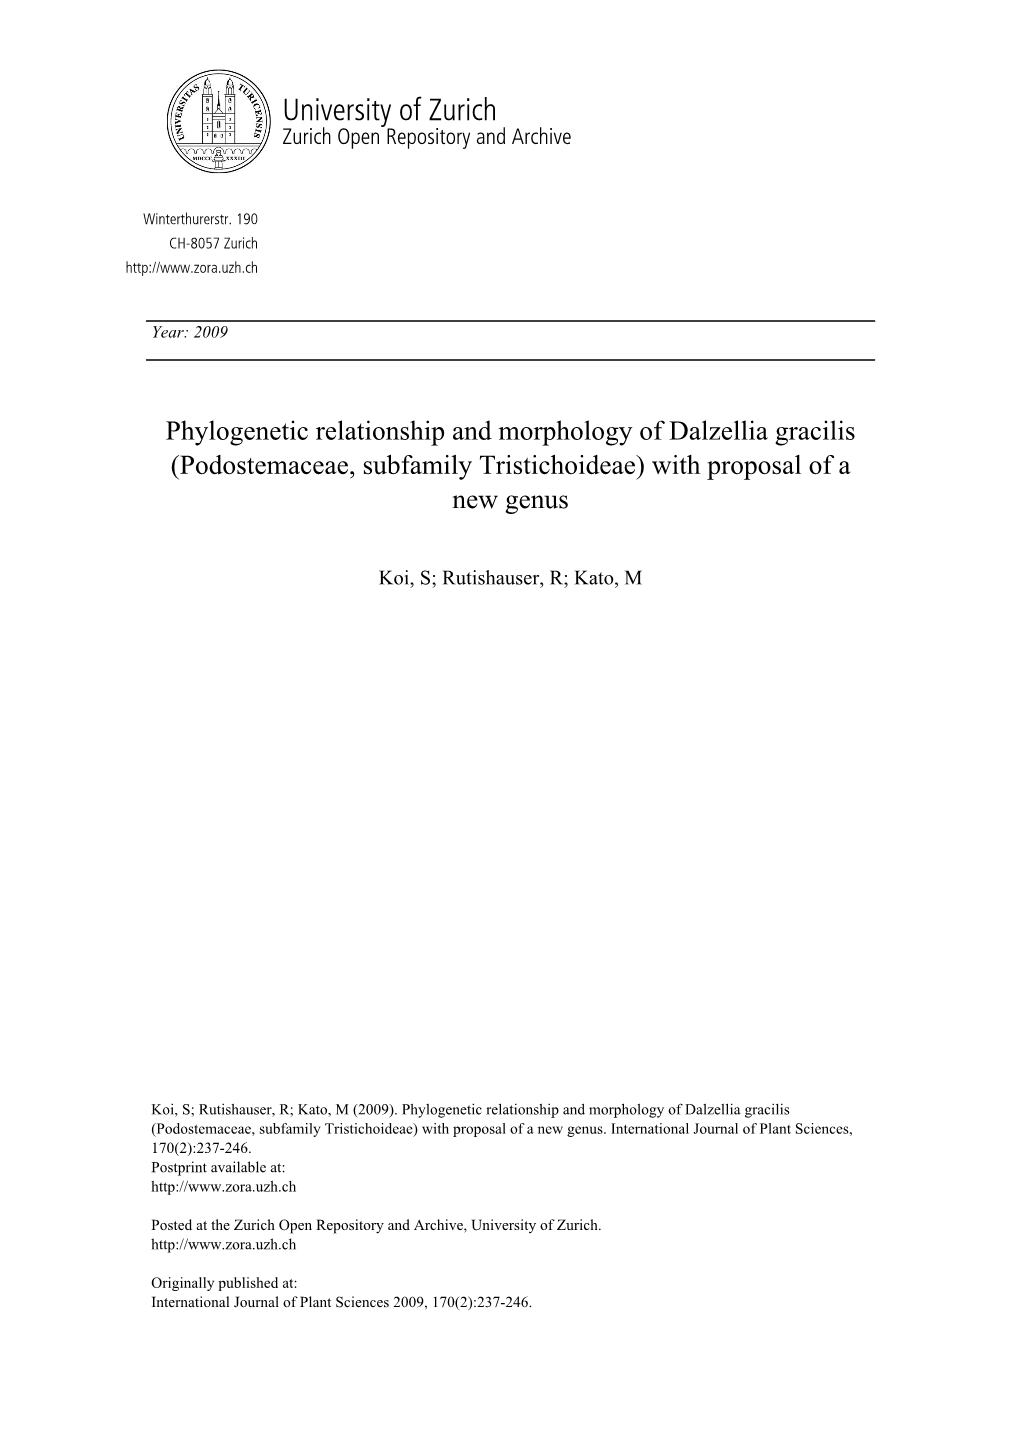 Phylogenetic Relationship and Morphology of Dalzellia Gracilis (Podostemaceae, Subfamily Tristichoideae) with Proposal of a New Genus